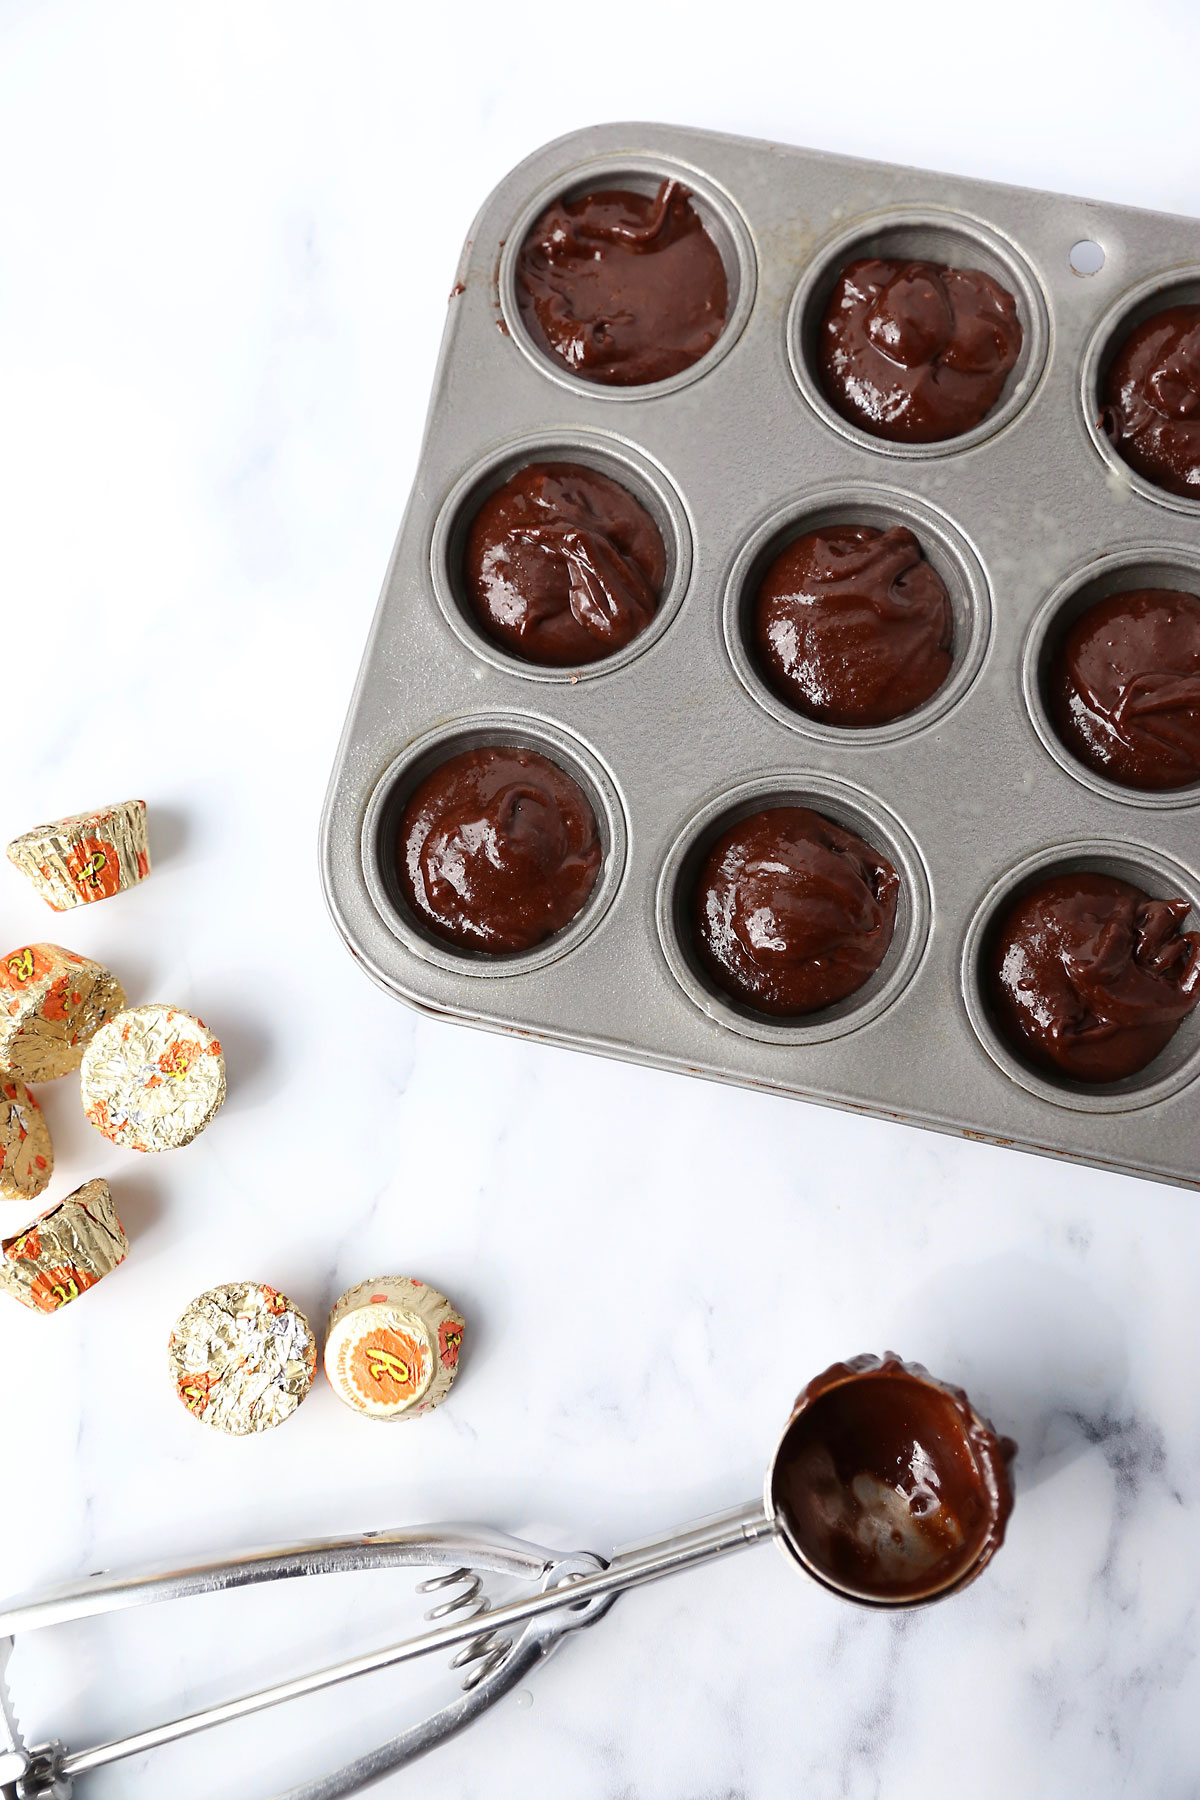 Peanut butter cup brownie bites: fill muffin cups 2/3 way full